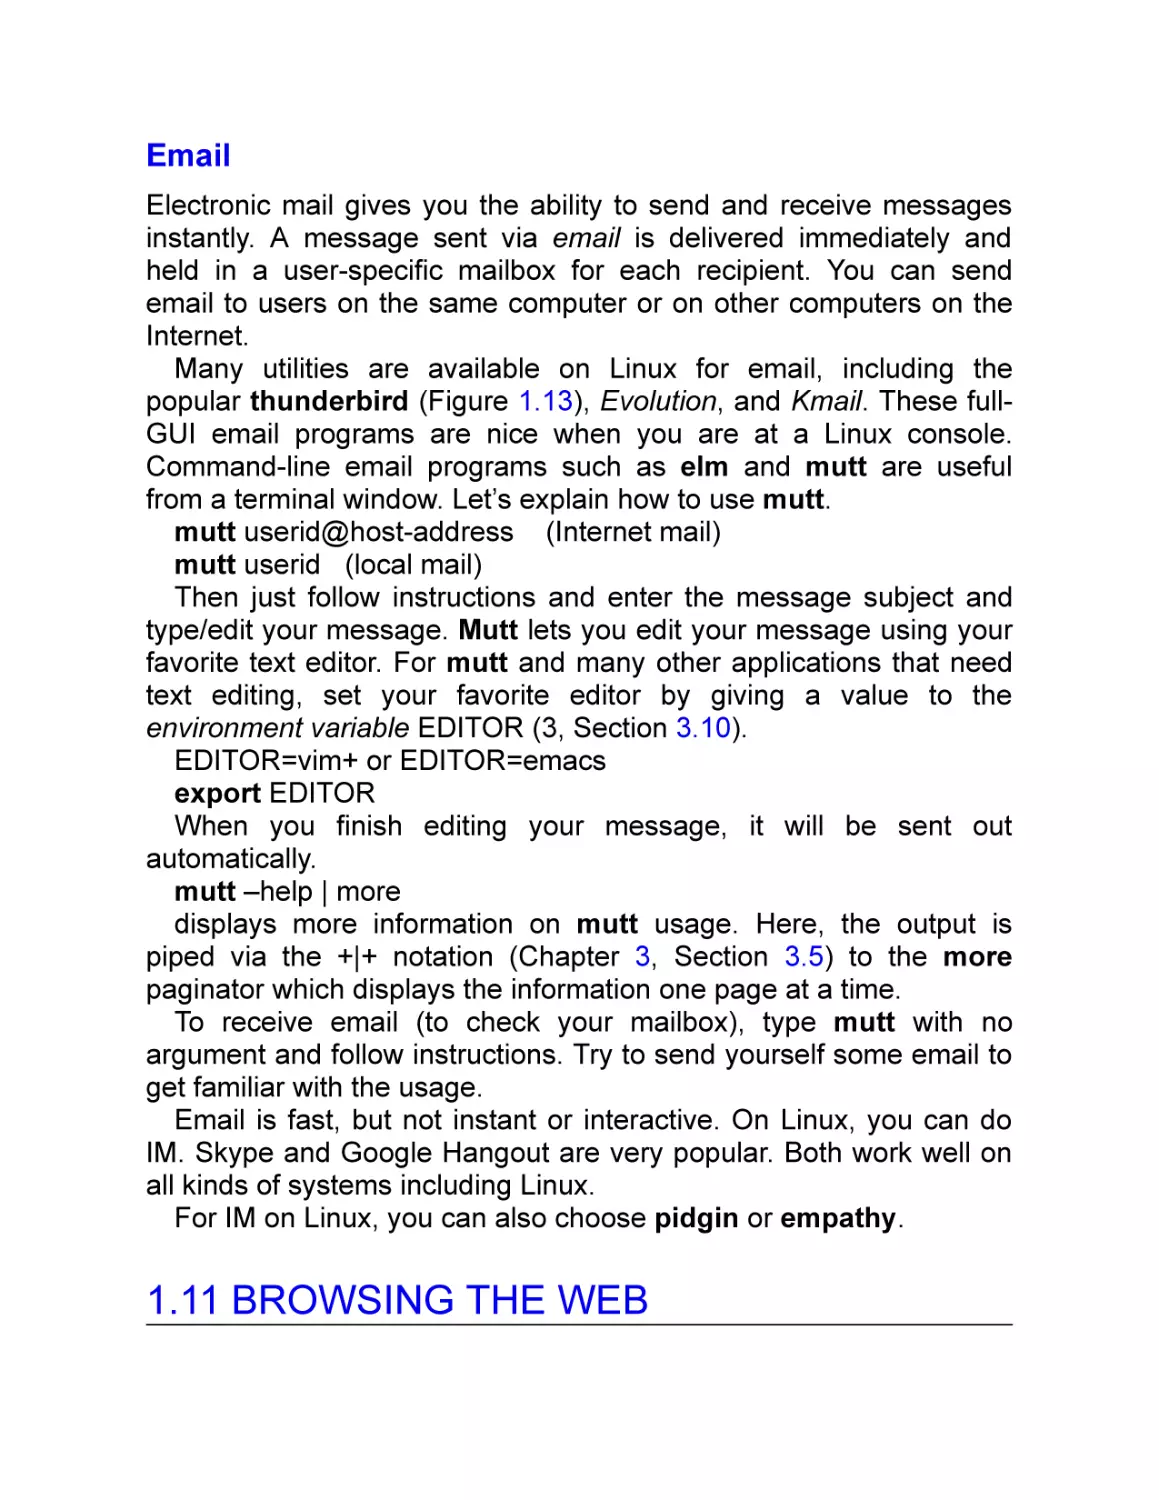 Email
1.11 Browsing the Web